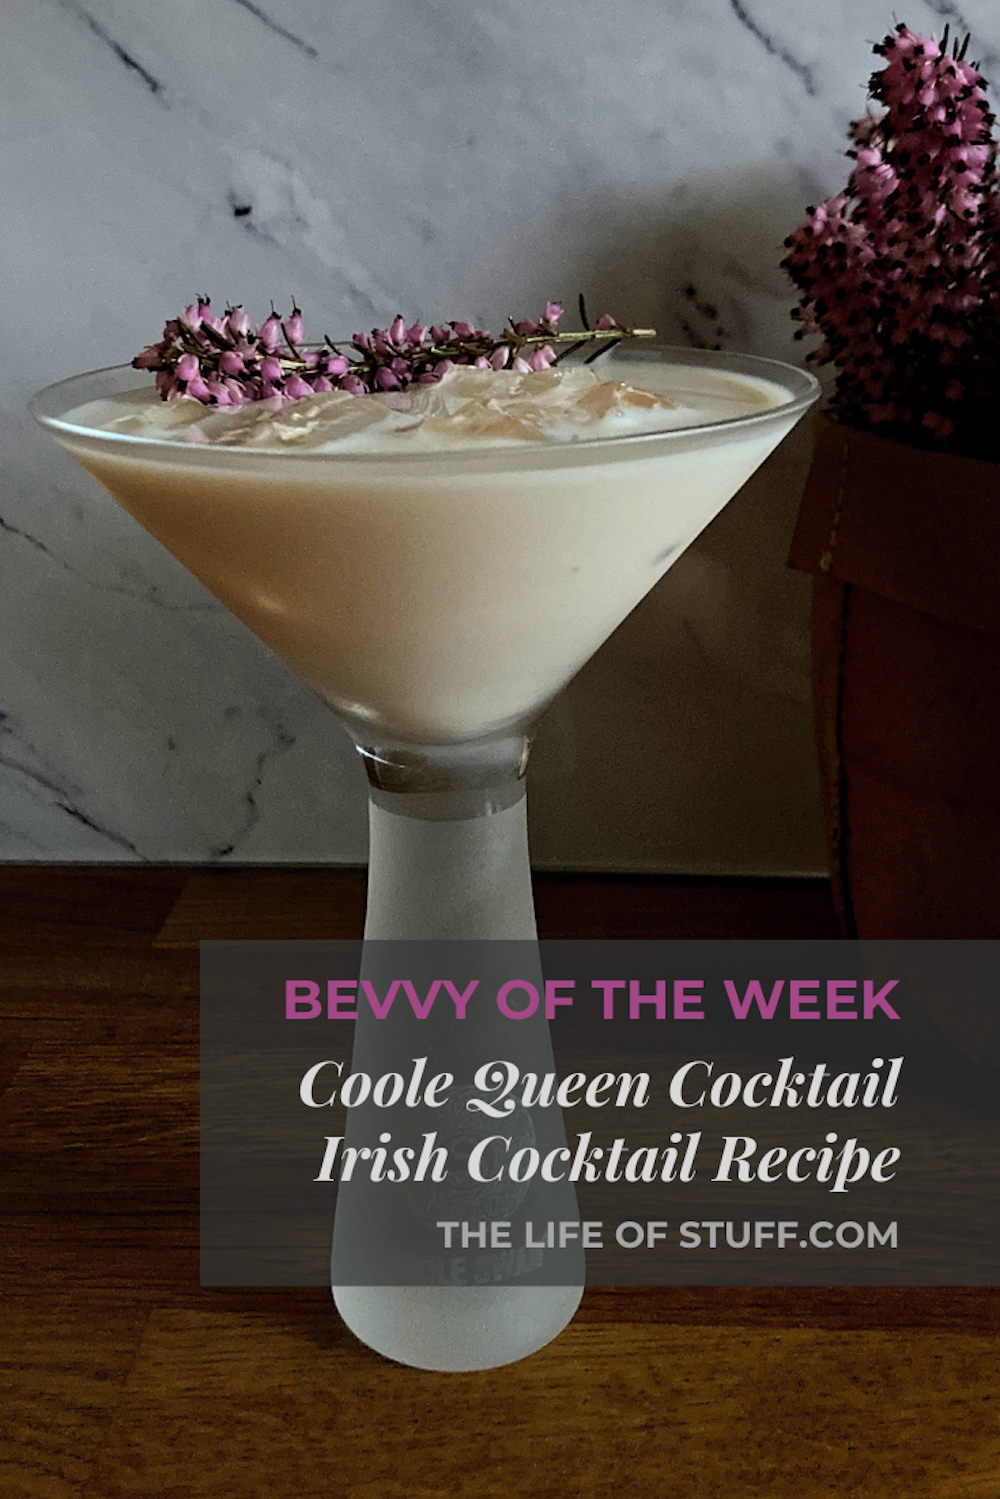 Bevvy of the Week - Coole Queen Cocktail - Irish Cocktail Recipe - The Life of Stuff .com